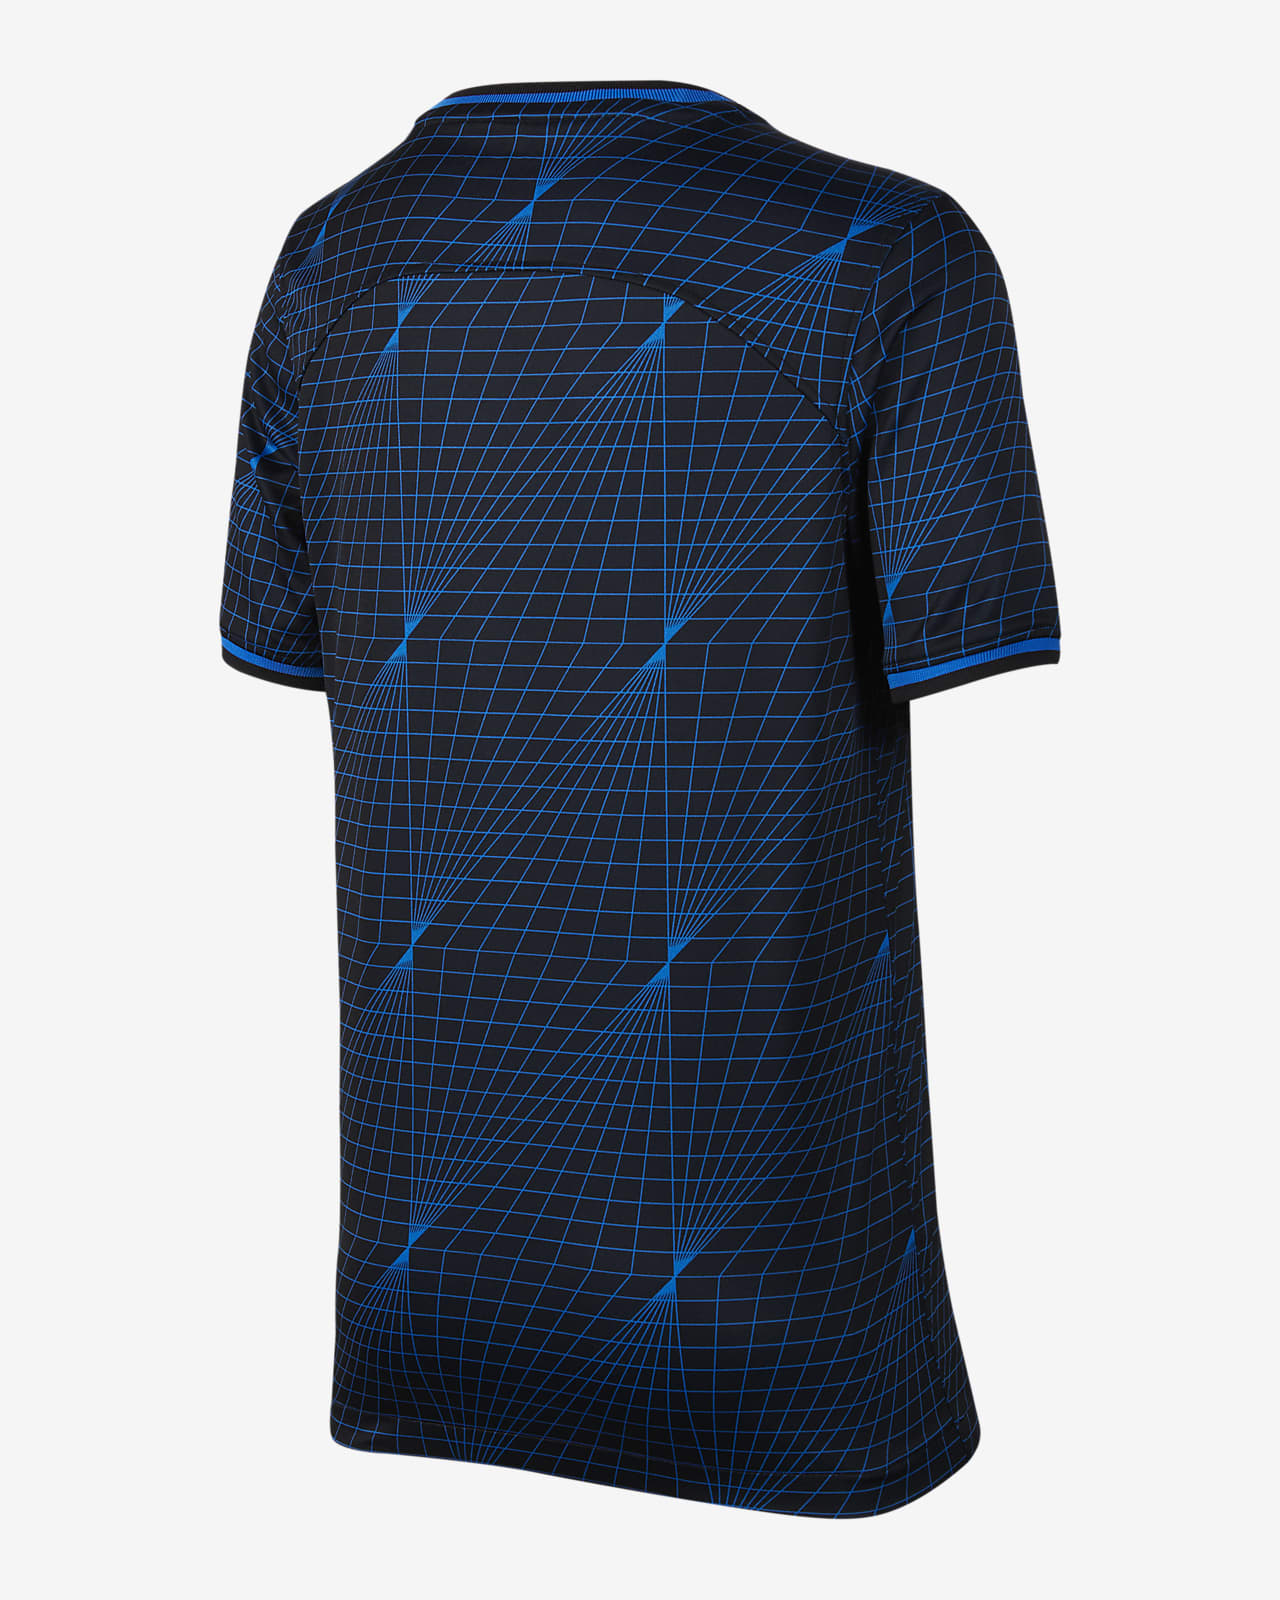 chelsea maillot nike